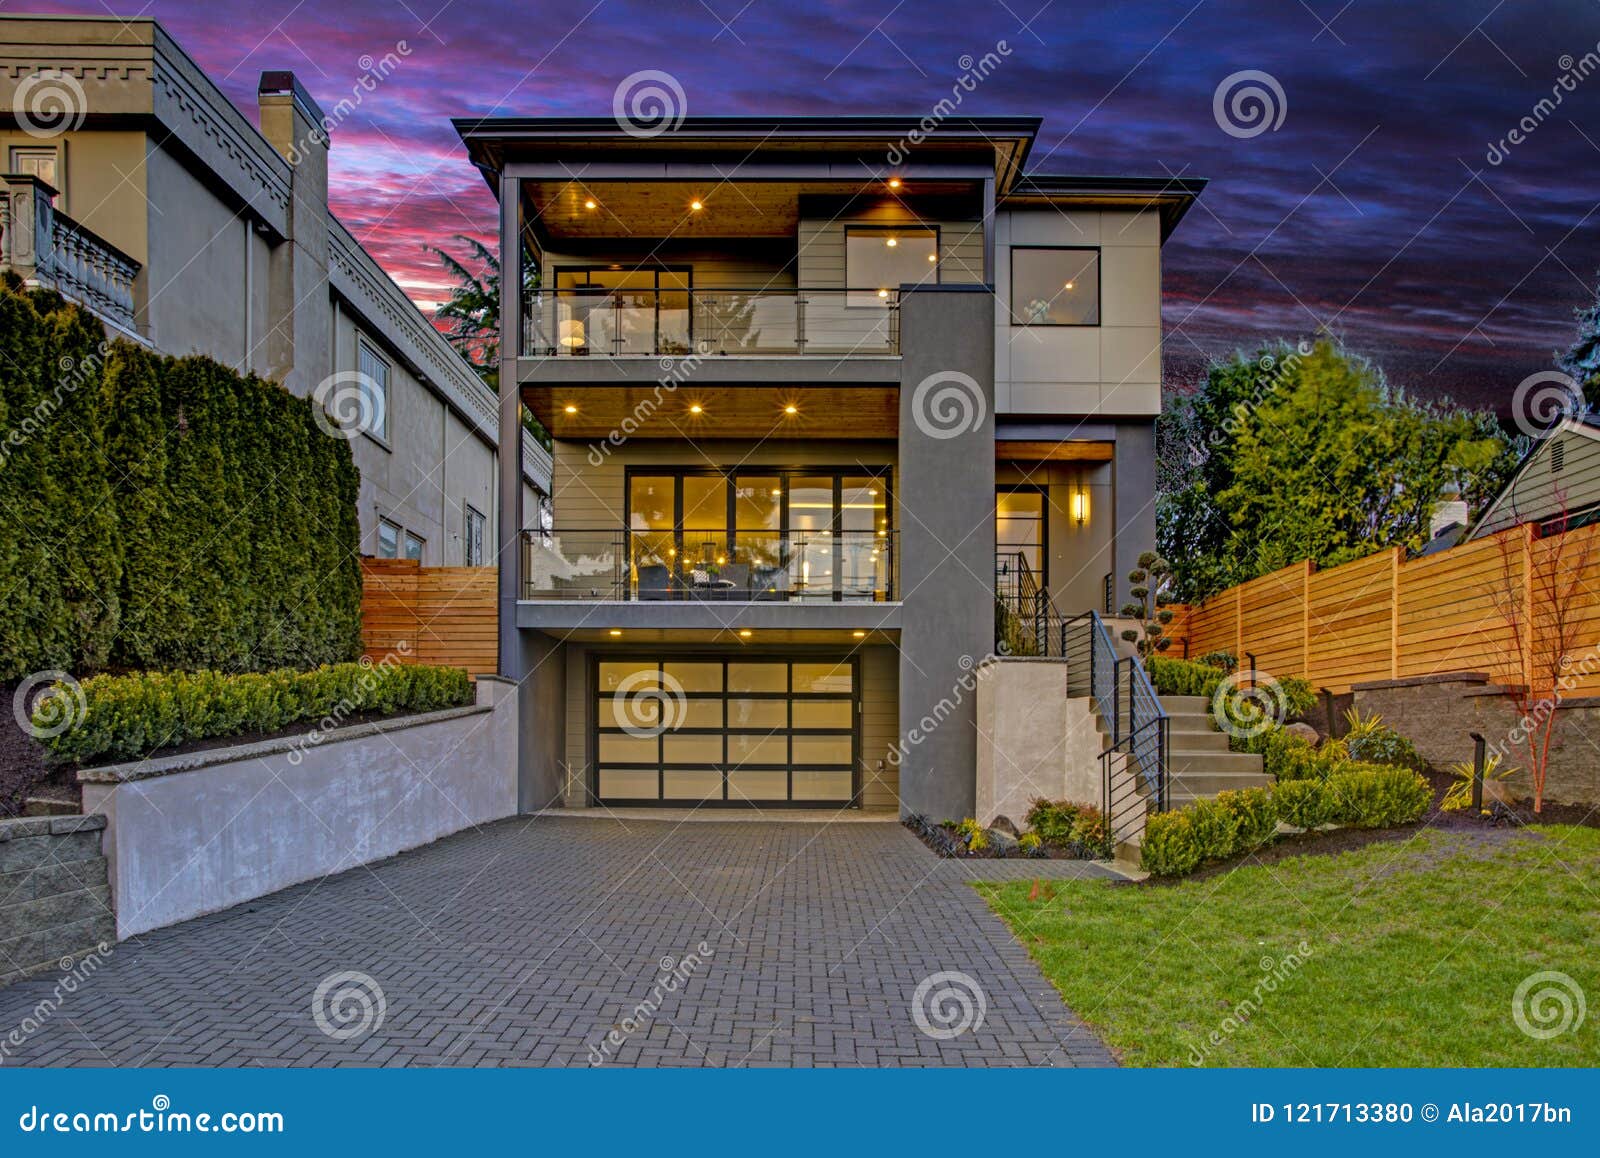 luxury modern home exterior at sunset